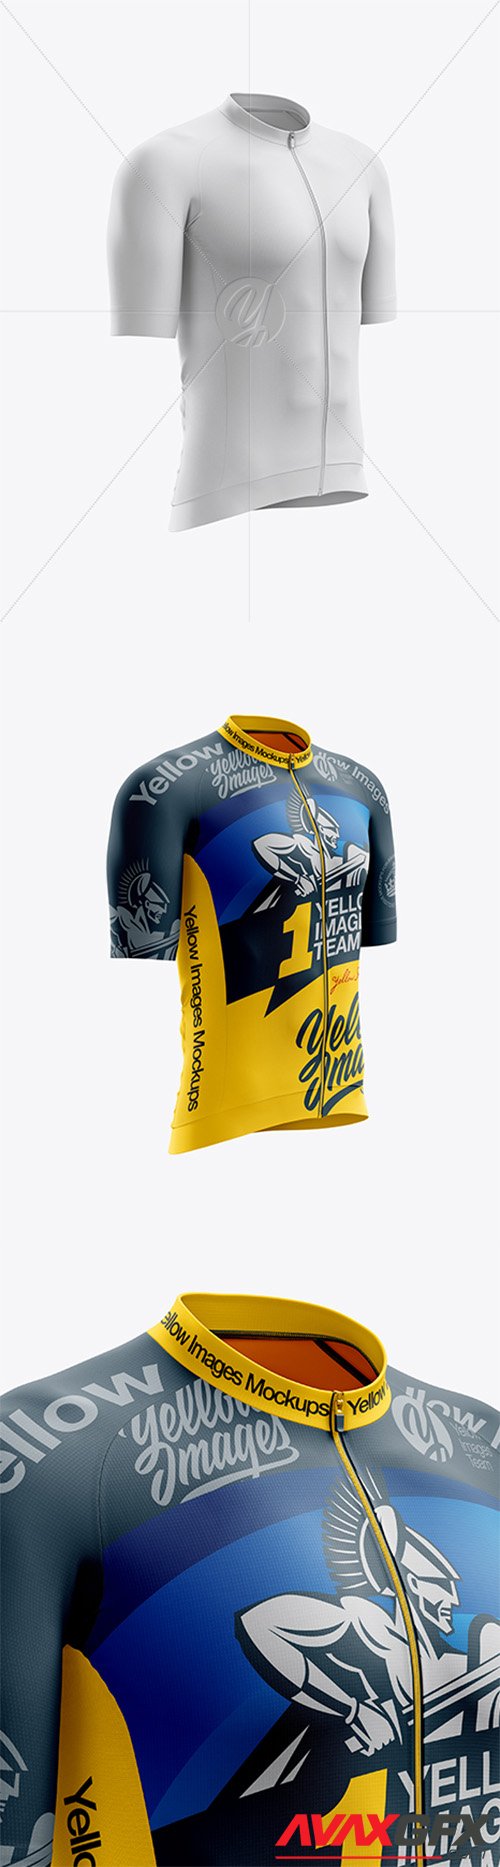 Men's Cycling Speed Jersey mockup (Right Half Side View ...